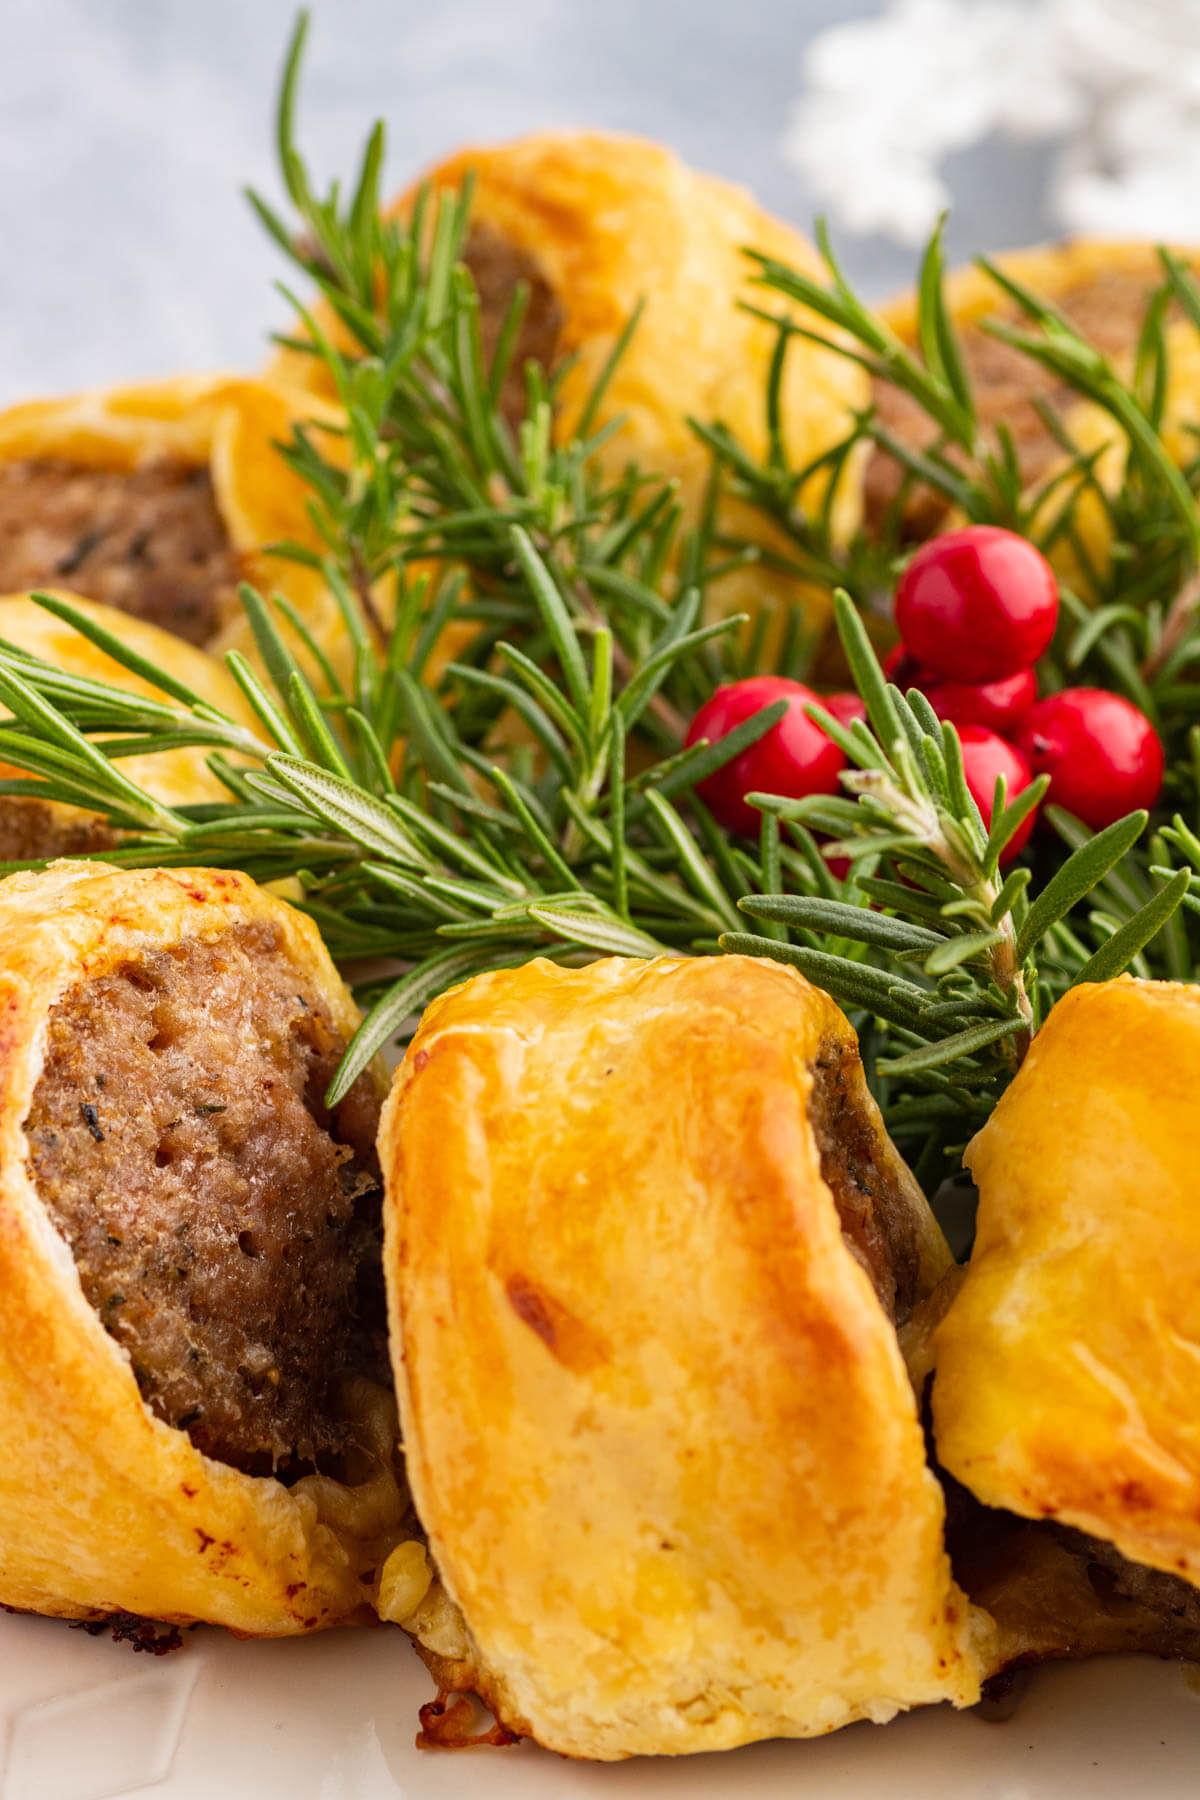 A festive golden baked sausage roll wreath garnished with fresh rosemary and cranberries.